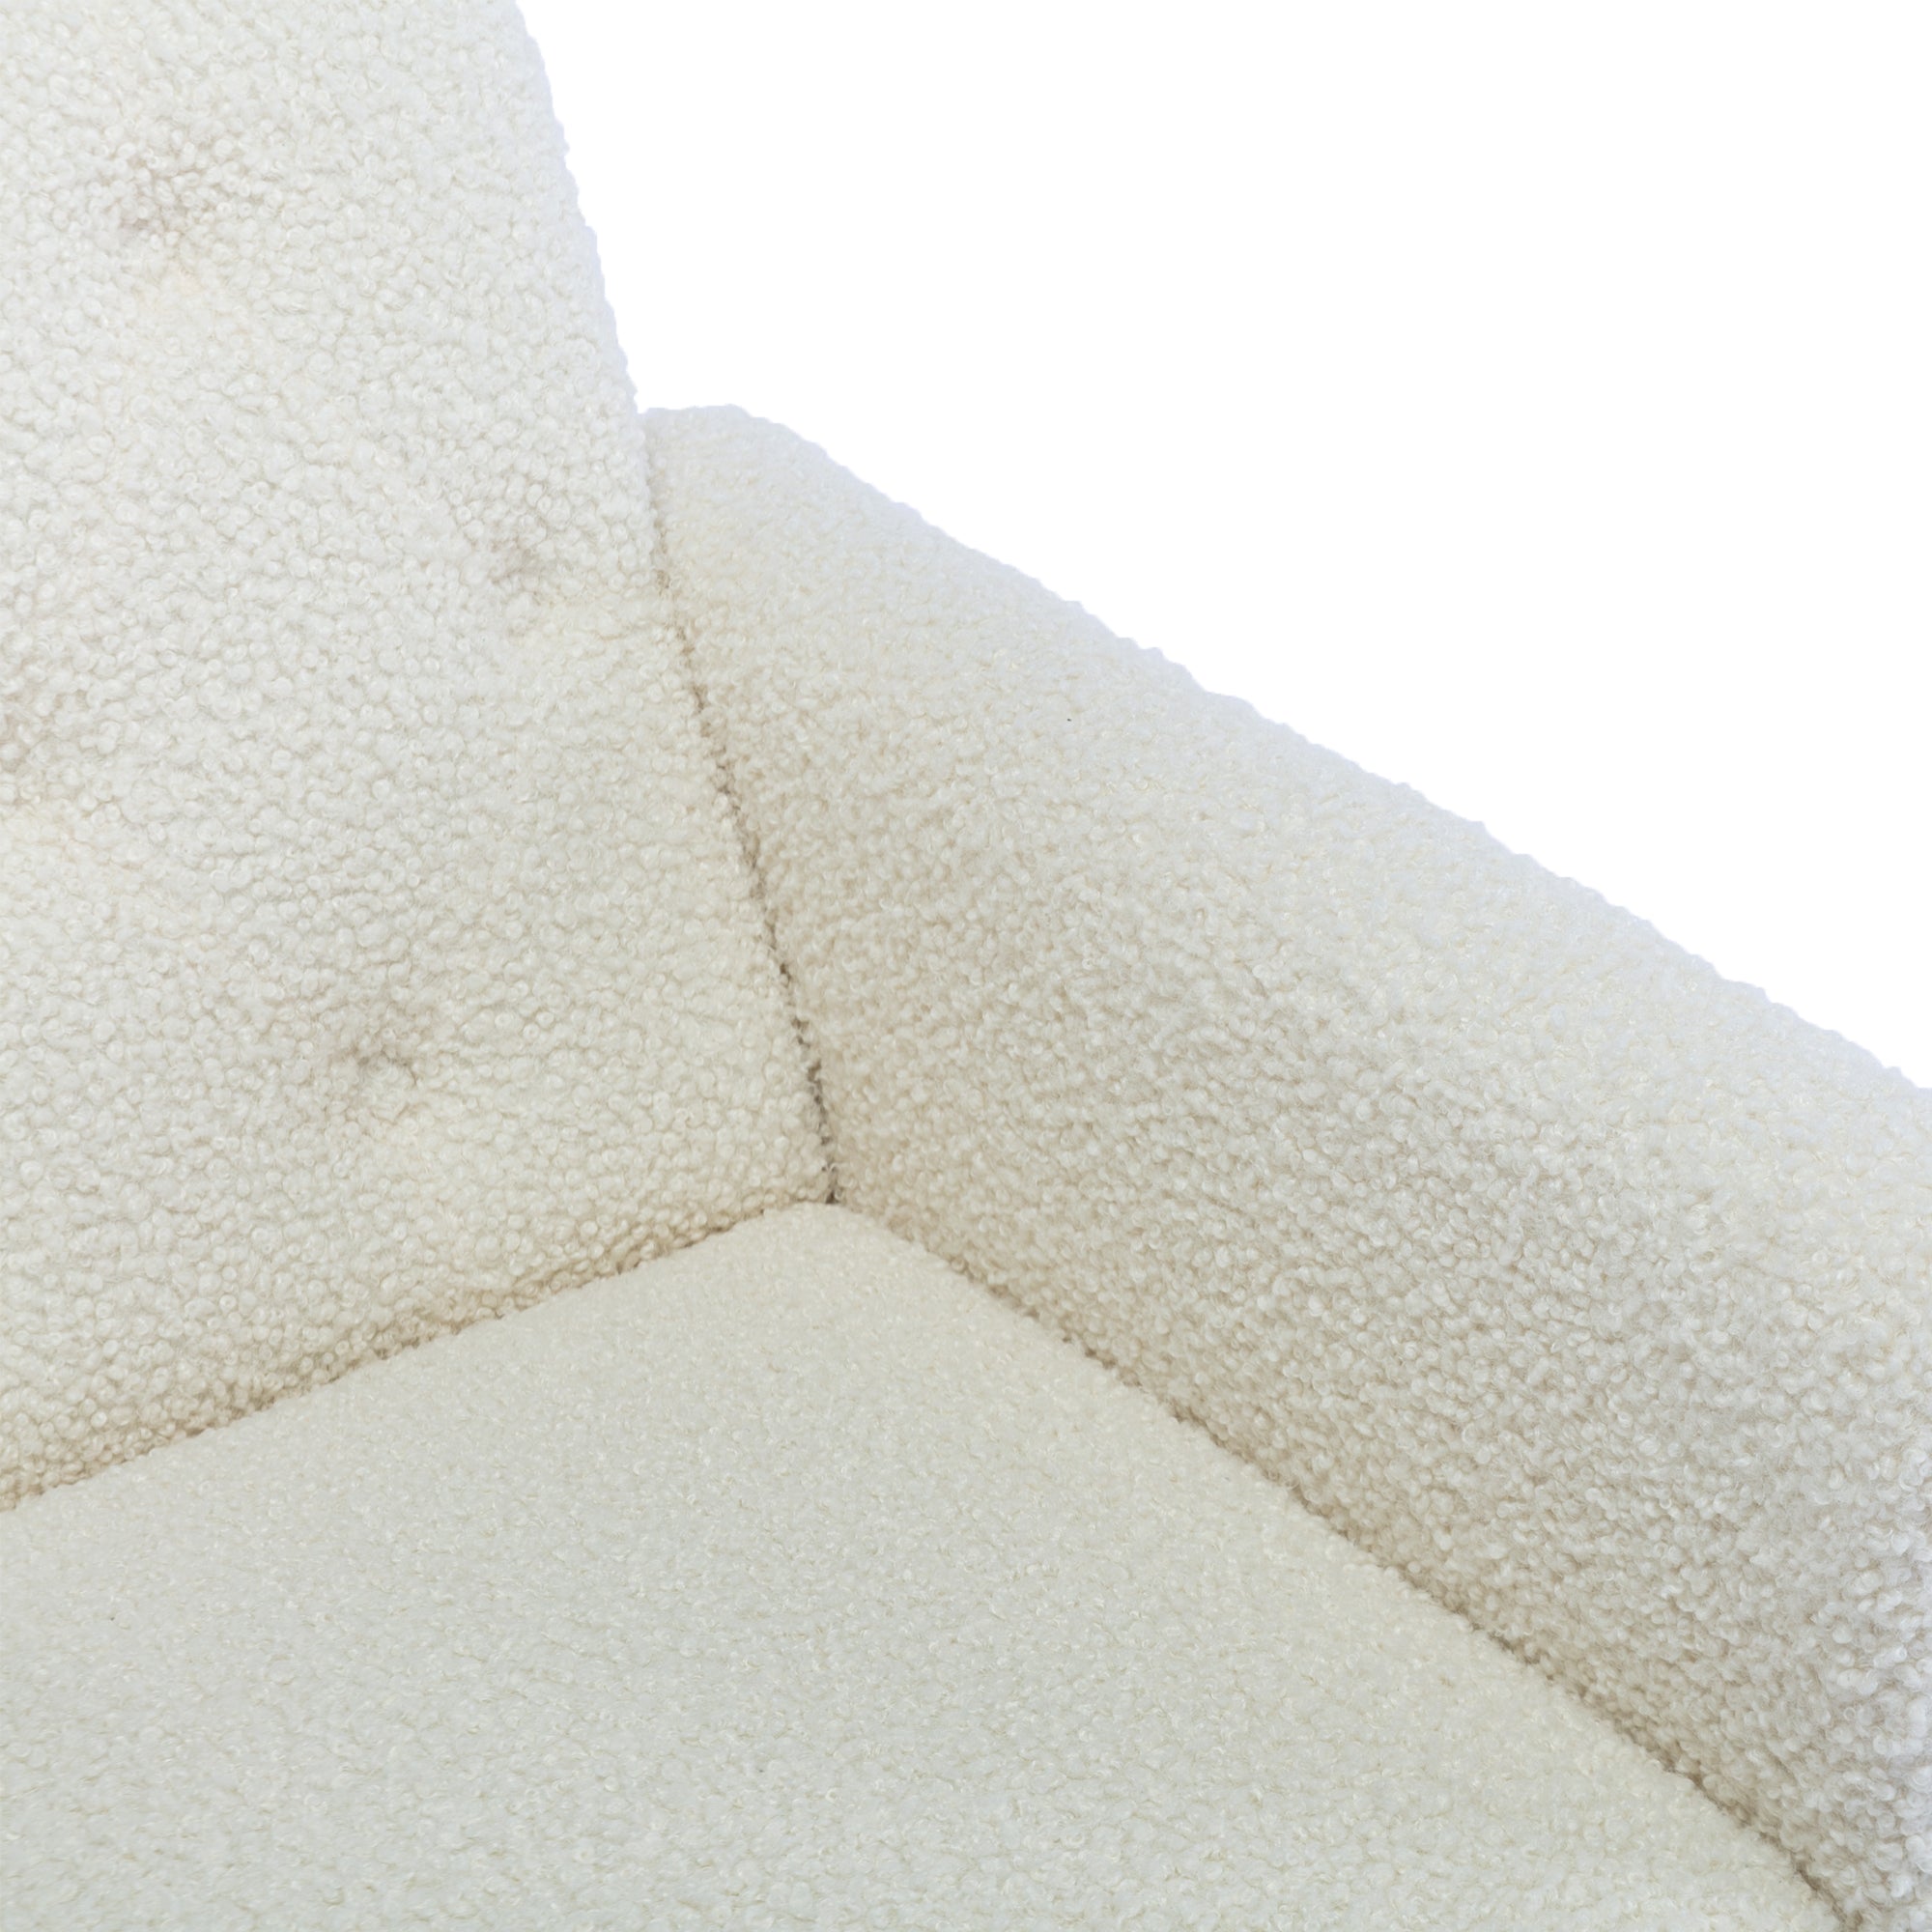 COOLMORE Velvet Accent Chair with Adjustable Armrests white teddy-metal